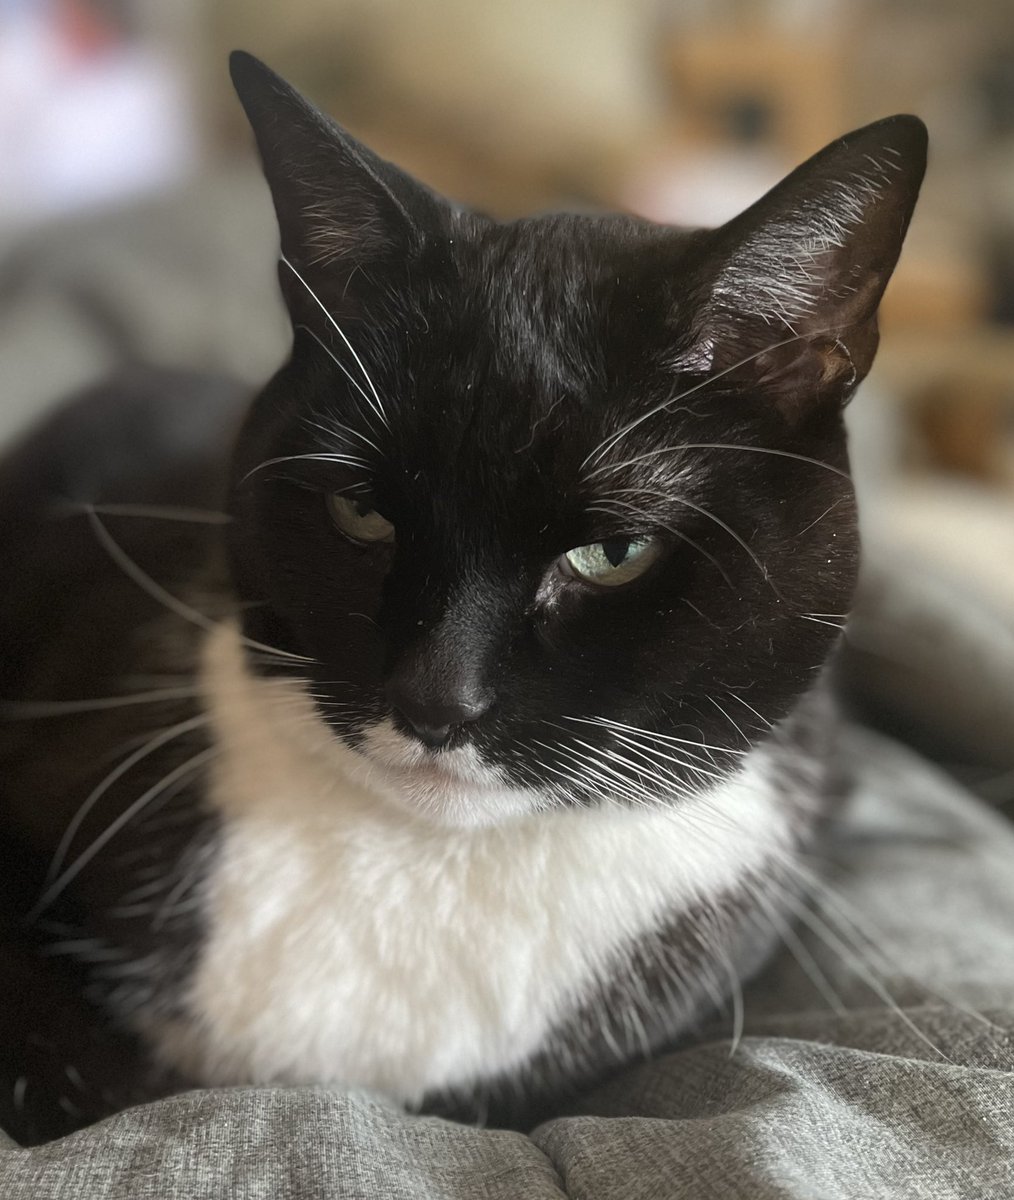 Been feeling sick the past days, vet today said I check out fine but I still don’t feel well - Malloy

(Can you send Malloy some well wishes? - Malloy’s Daddy)

#CatsOnTwitter #CatsOfTwitter #Cats #tuxiecats #FeelingSick